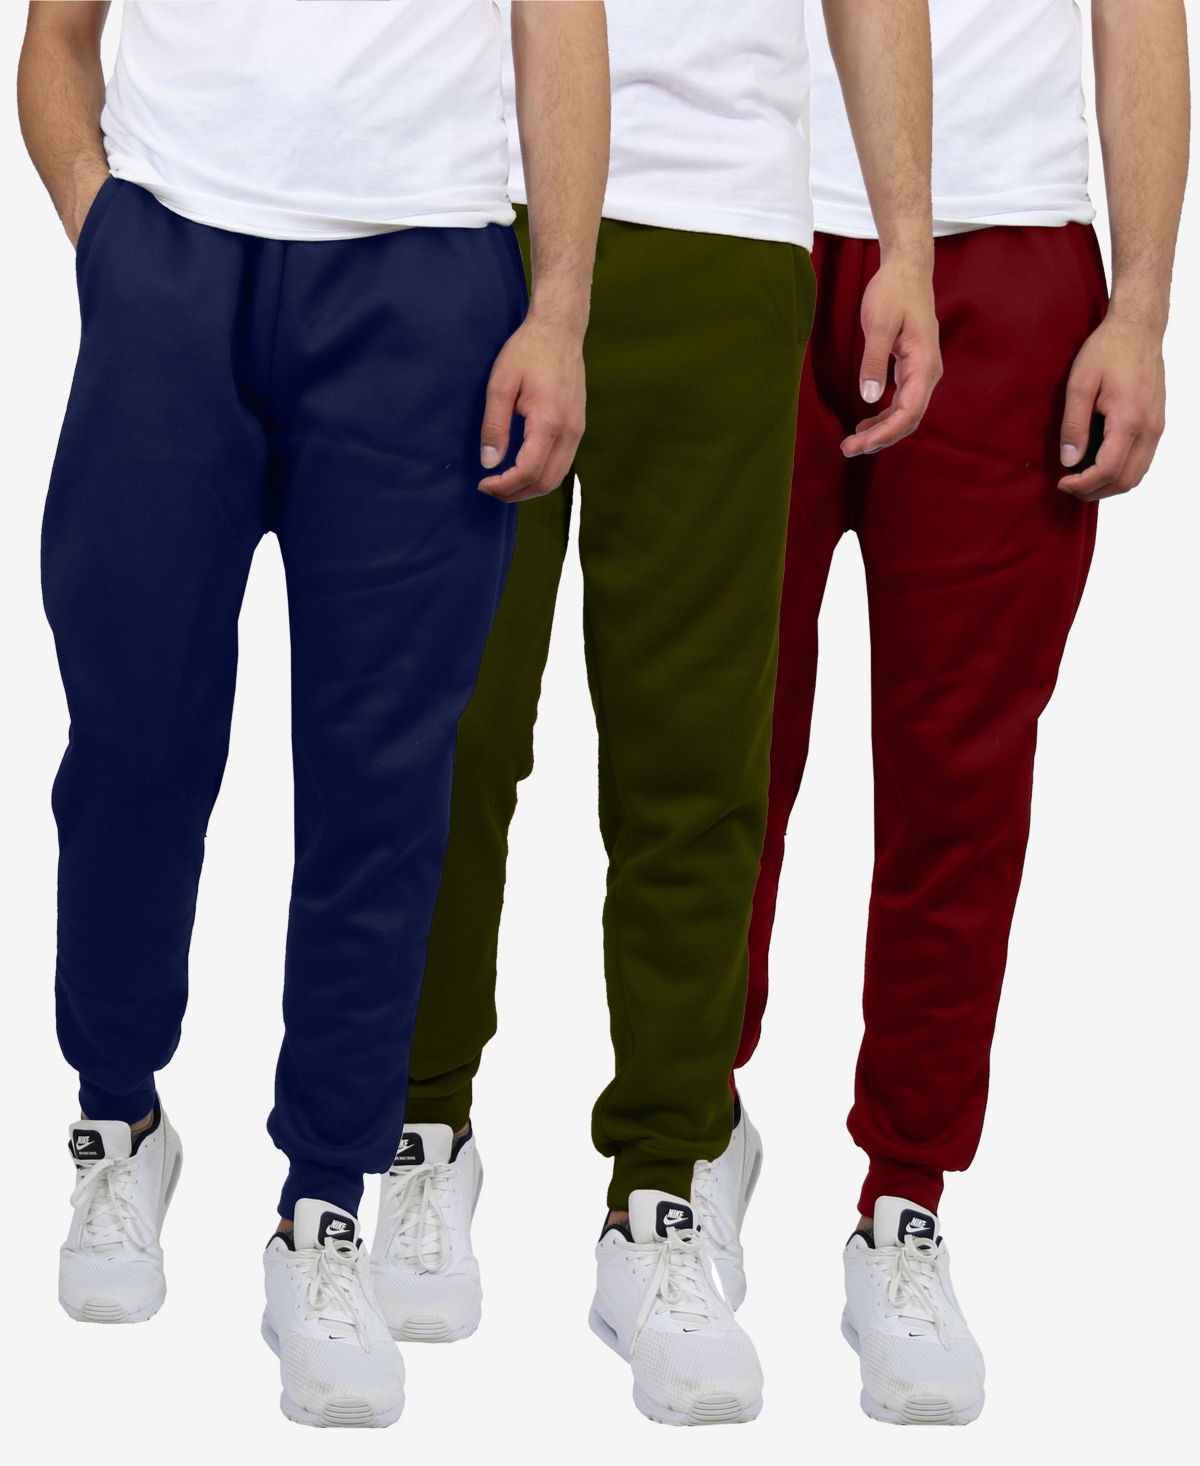 Galaxy By Harvic Men's Slim Fit Heavyweight Classic Fleece Jogger Sweatpants, Pack Of 3 In Navy,olive,burgundy